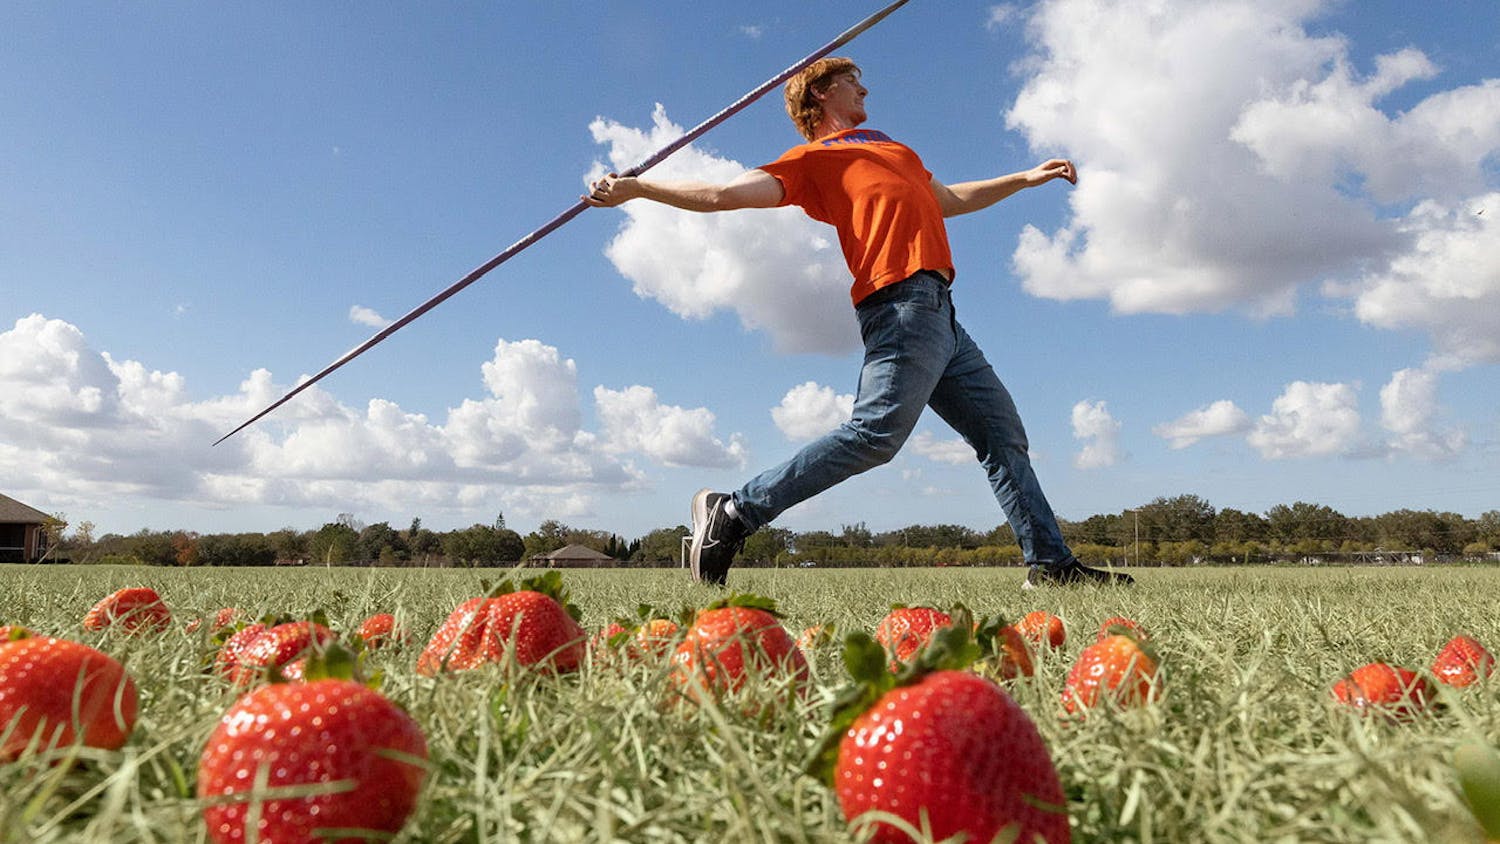 Florida track star and javelin thrower Mark Porter is a Ph.D. candidate learning to grow and perfect the taste of a strawberry.